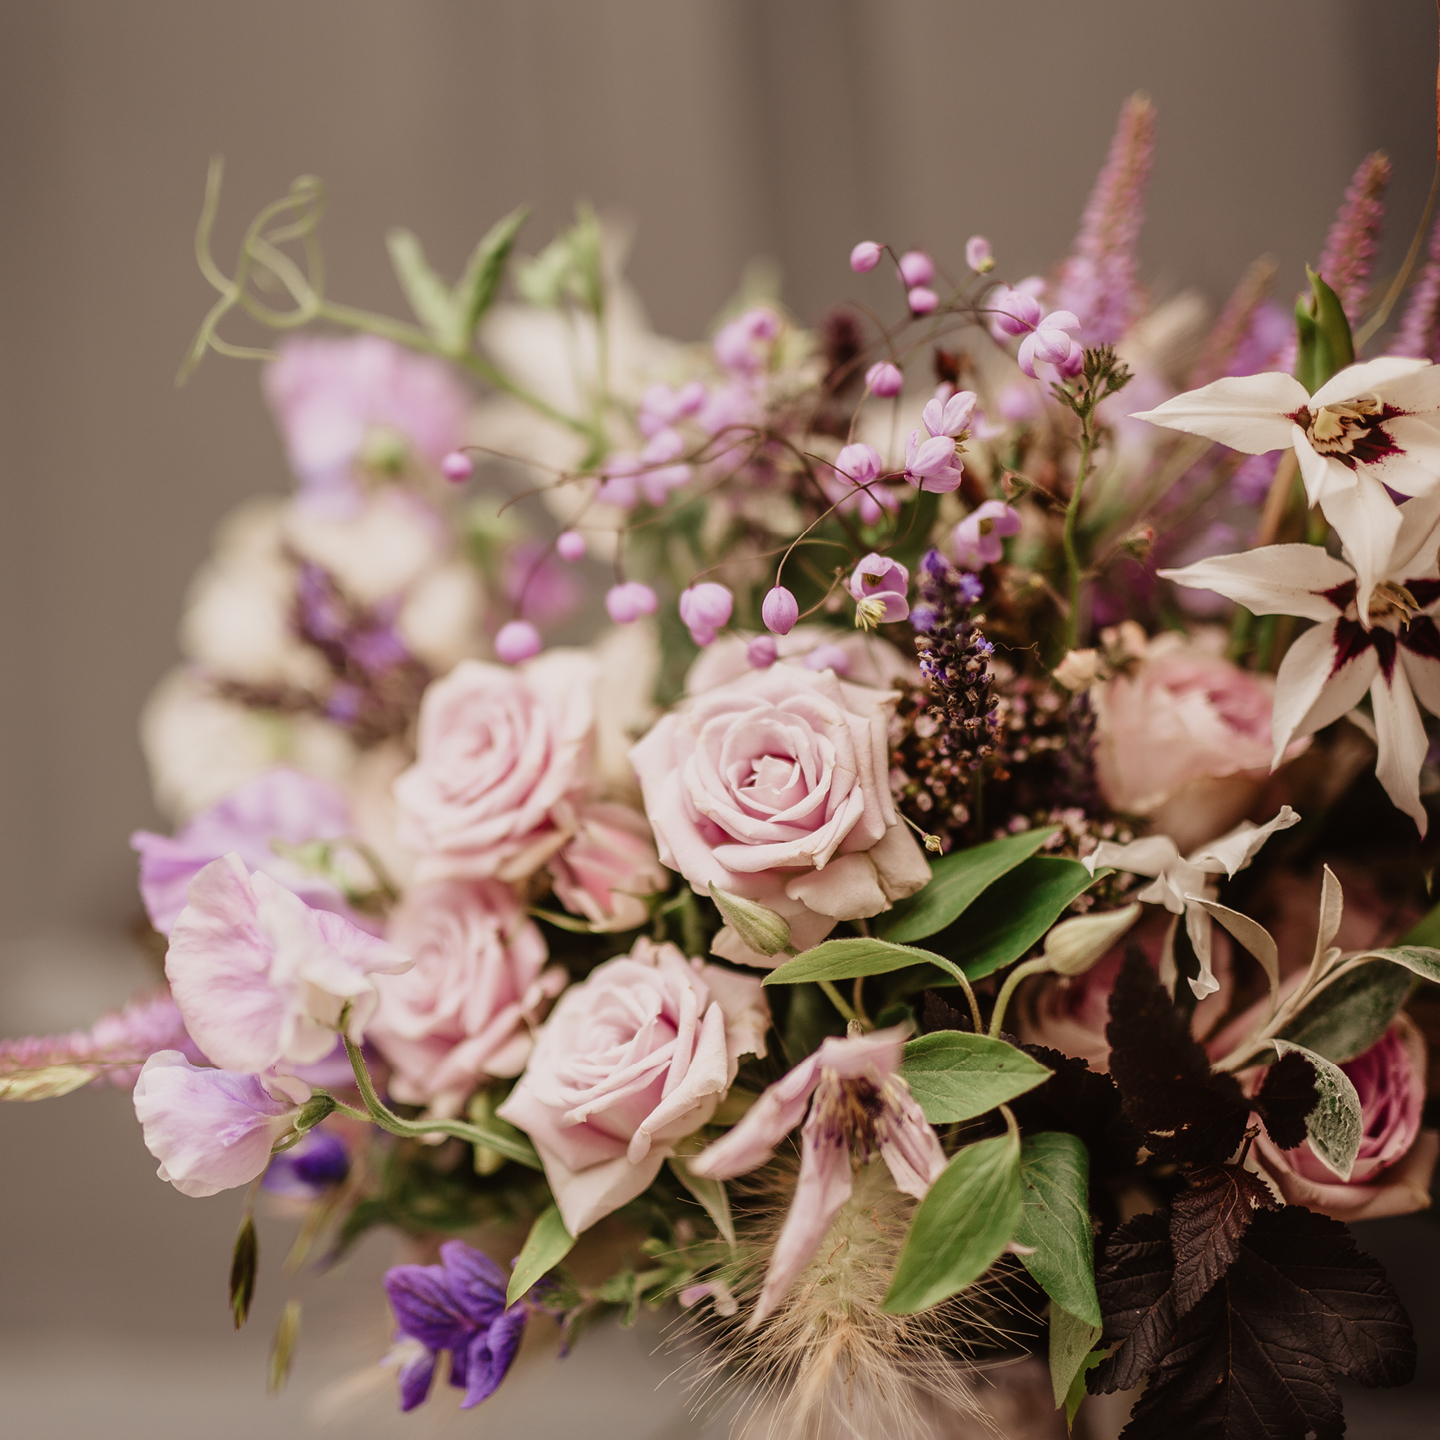 Spring wedding bouquet traditions